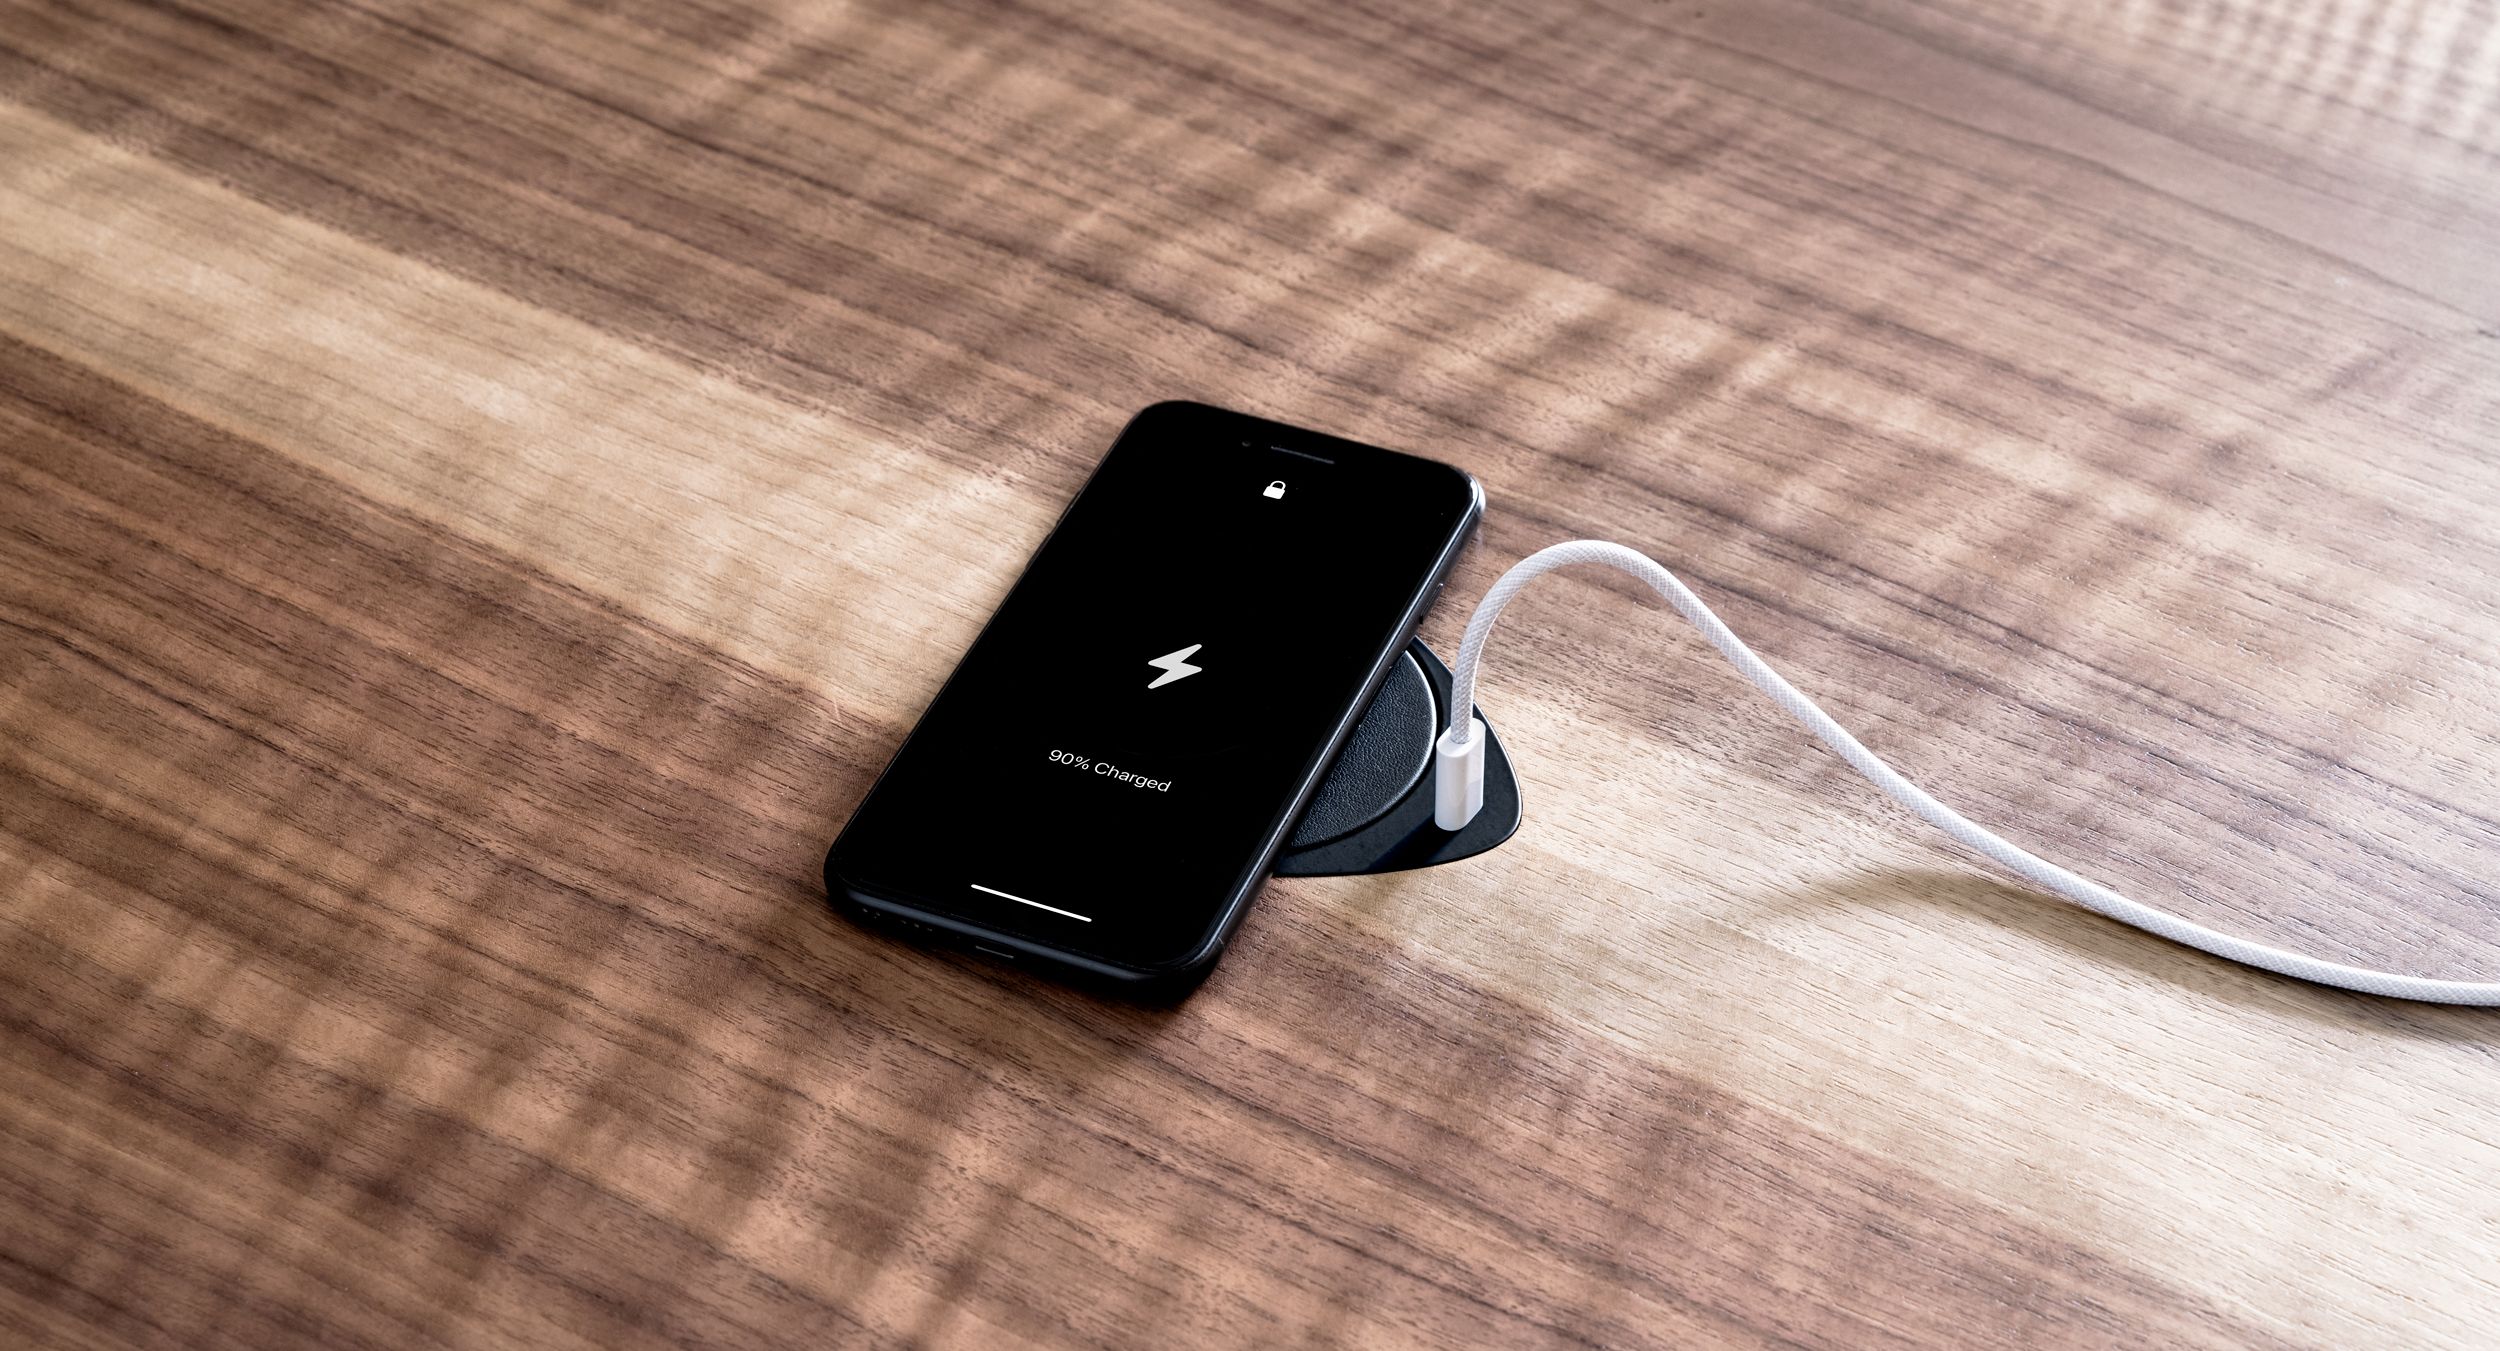 Helm's surface power includes wireless charging and USB-C connectivity to accommodate your daily needs. 